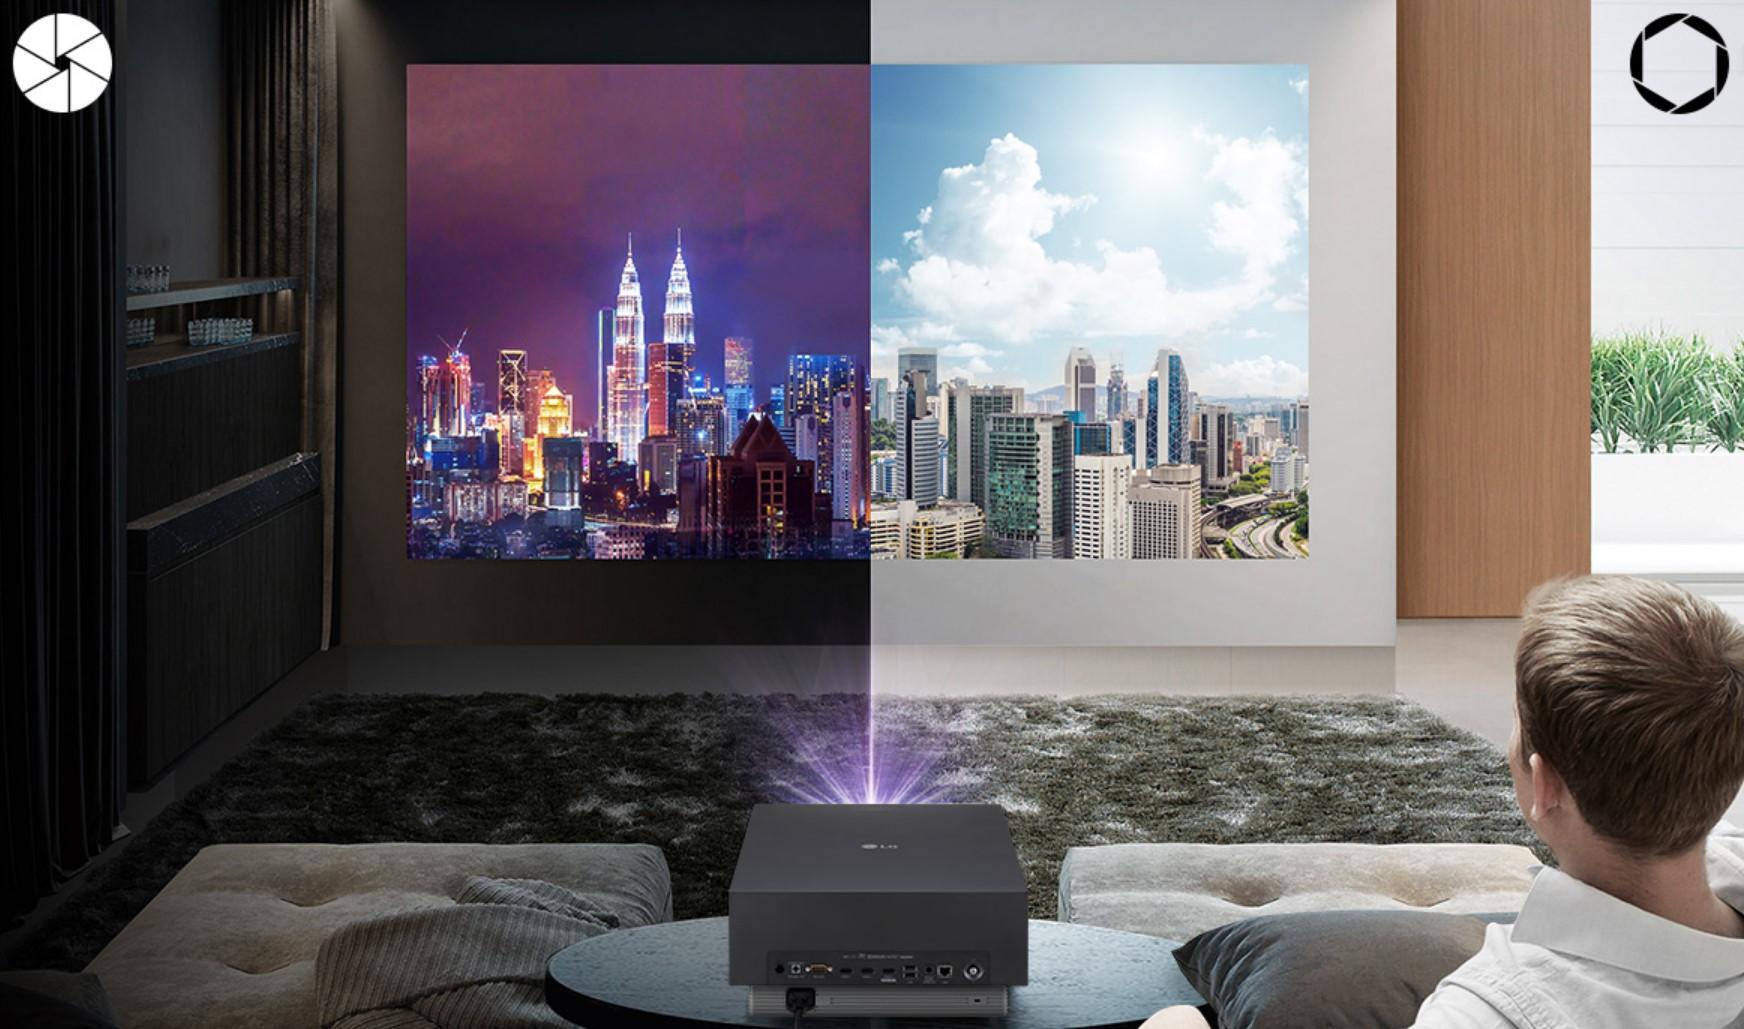 LG’s latest DLP projector impresses with good overall image quality, features, and video processing capabilities at its price. 2c4243db pjt au810pb 04 2 2 brightroom mode d